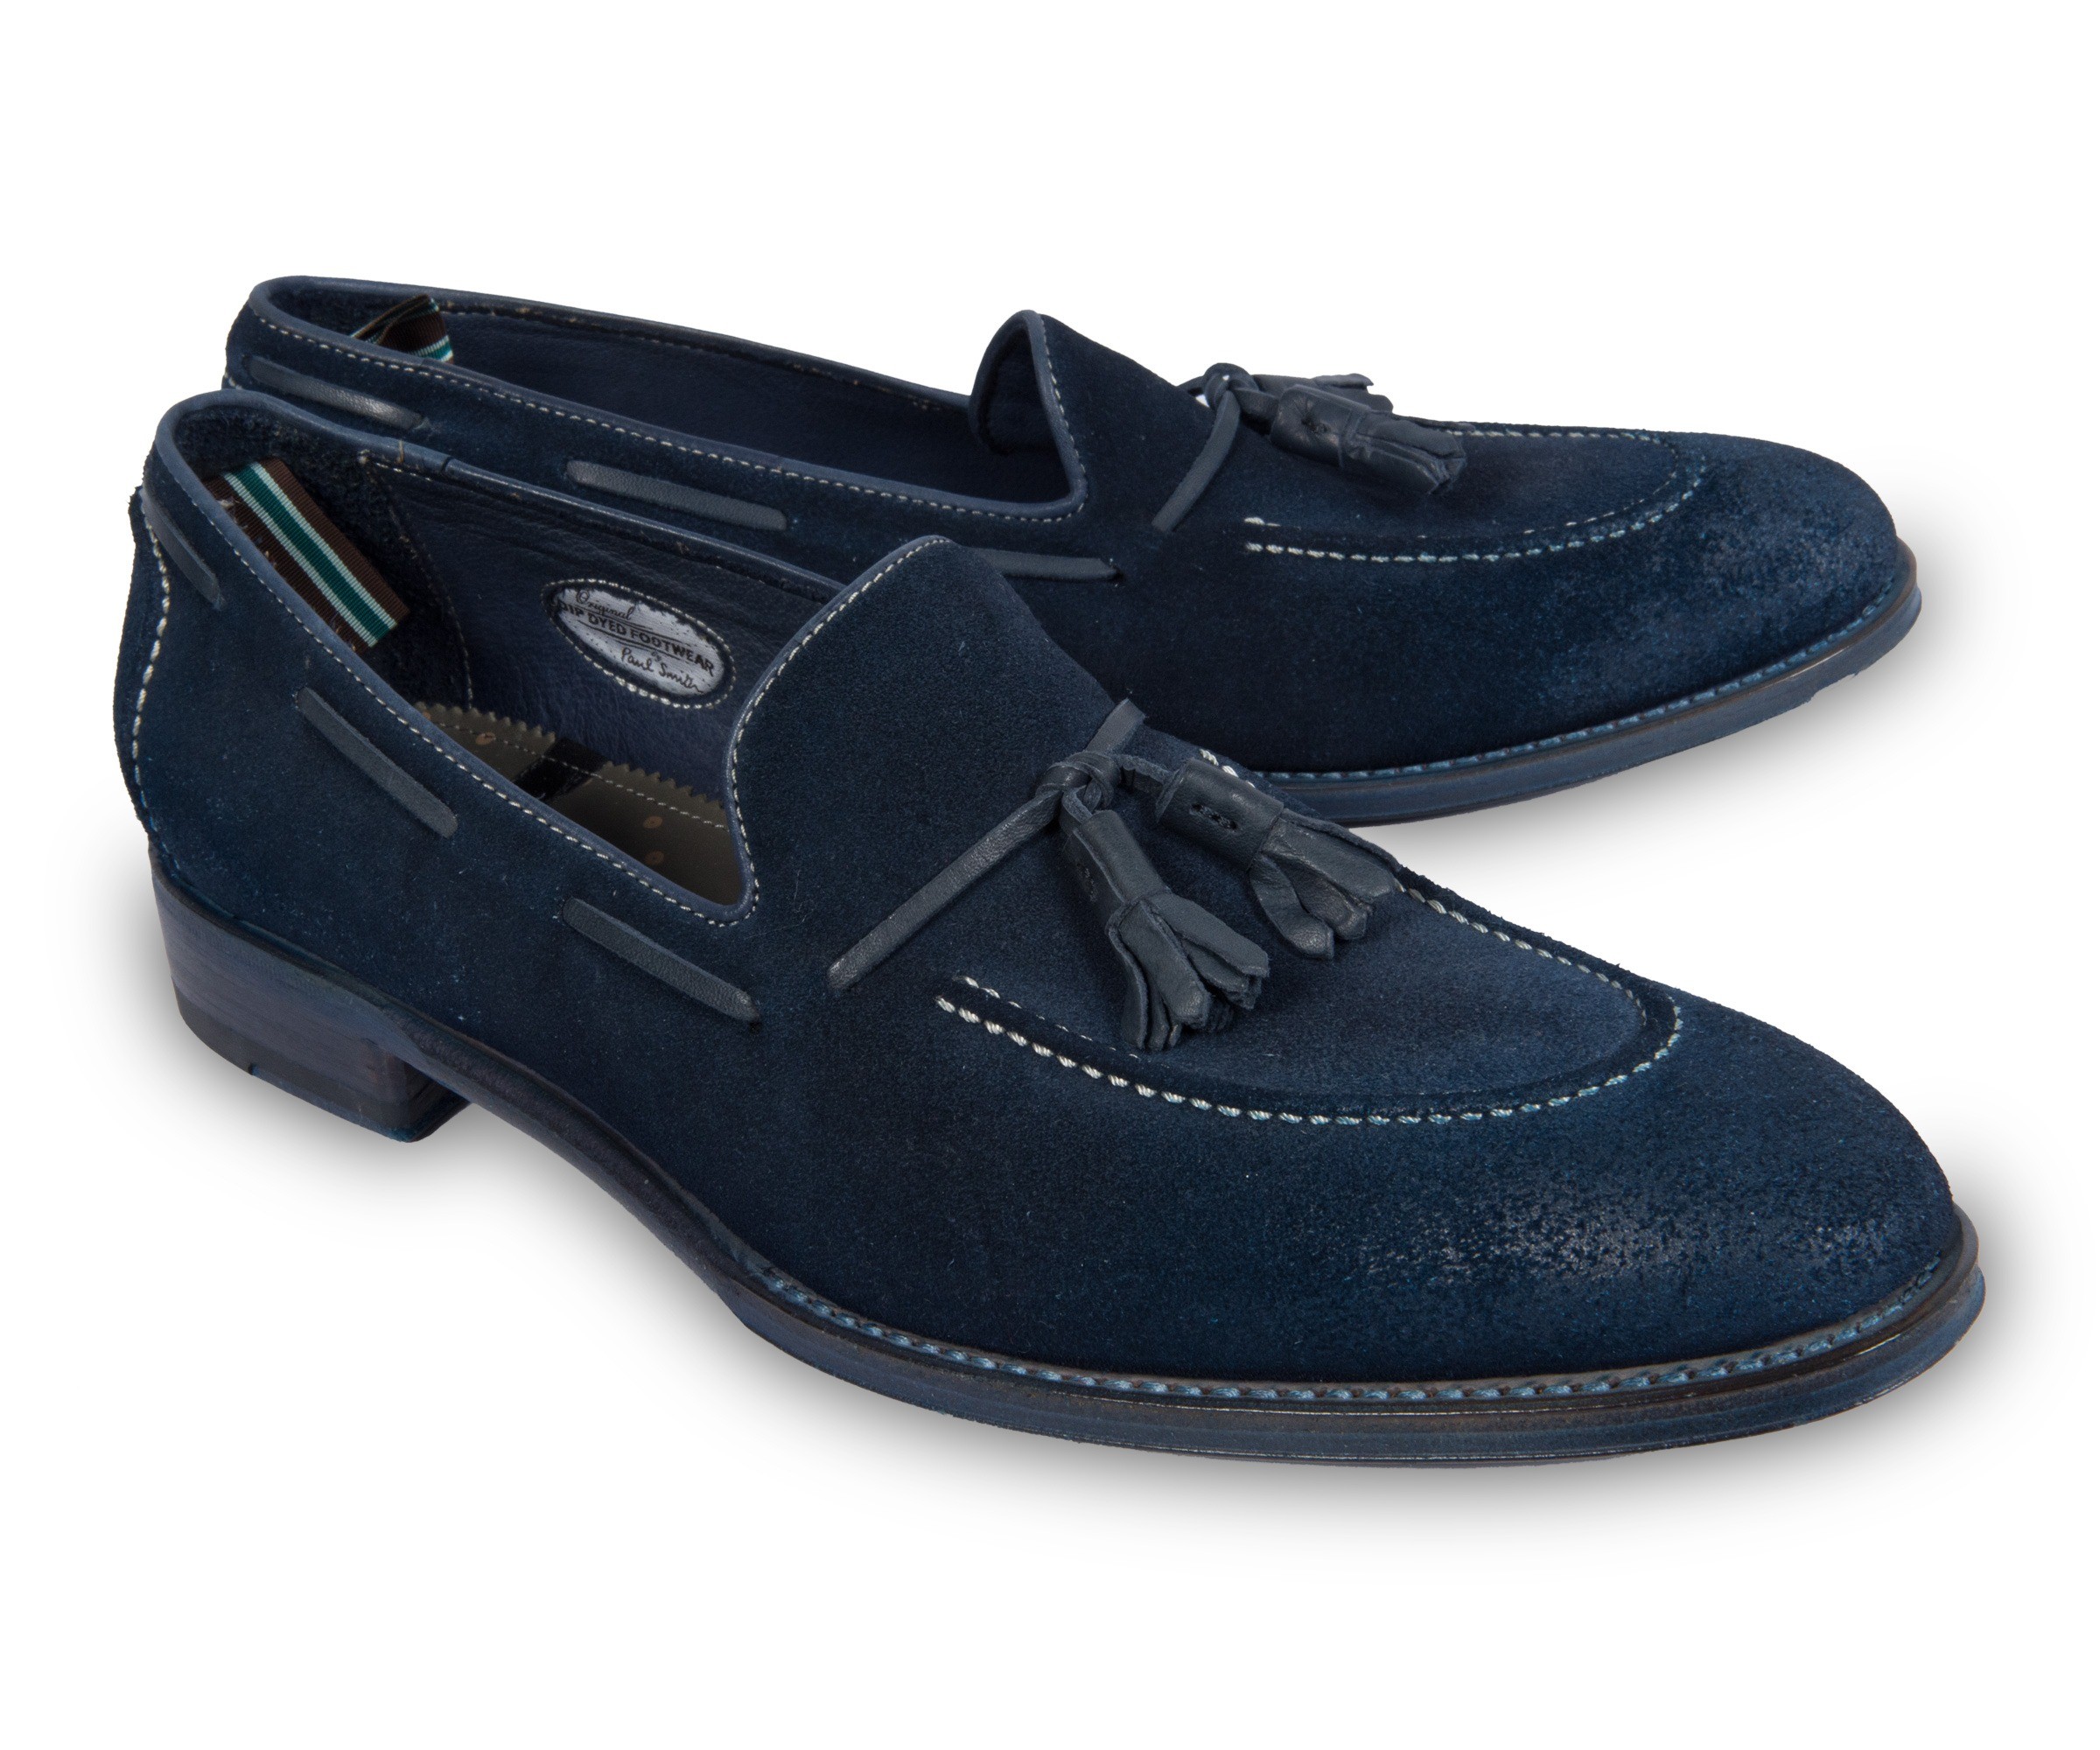 Paul Smith Shoes Suede Tassle Loafer Blue